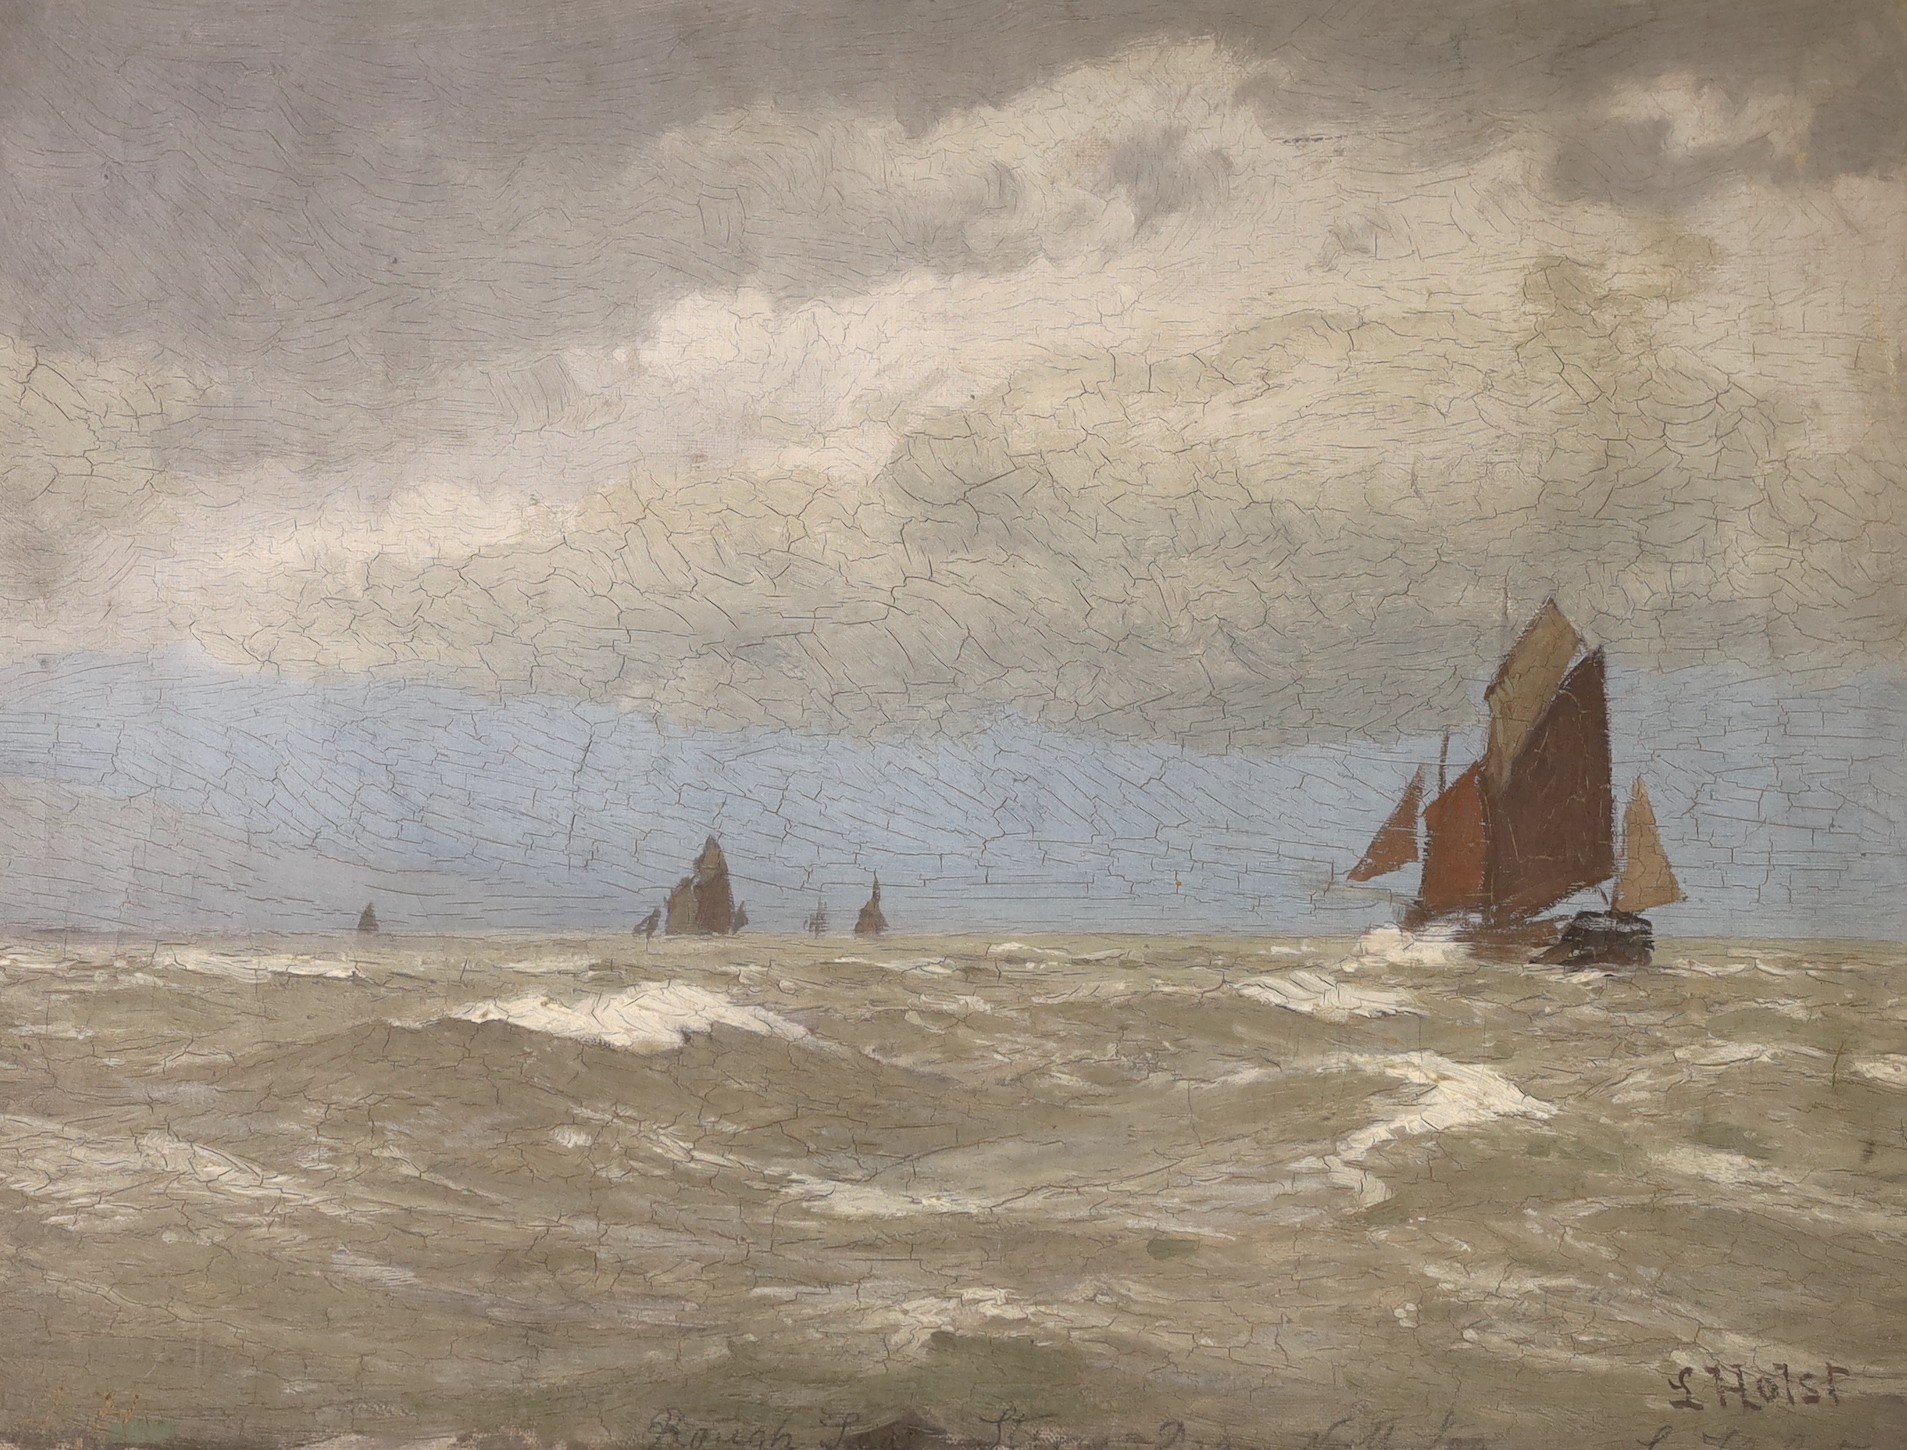 Lauritz Bernard Holst (Danish, 1848-1934), oil on canvas, sketch of fishing boats at sea, signed, 31 x 42cm